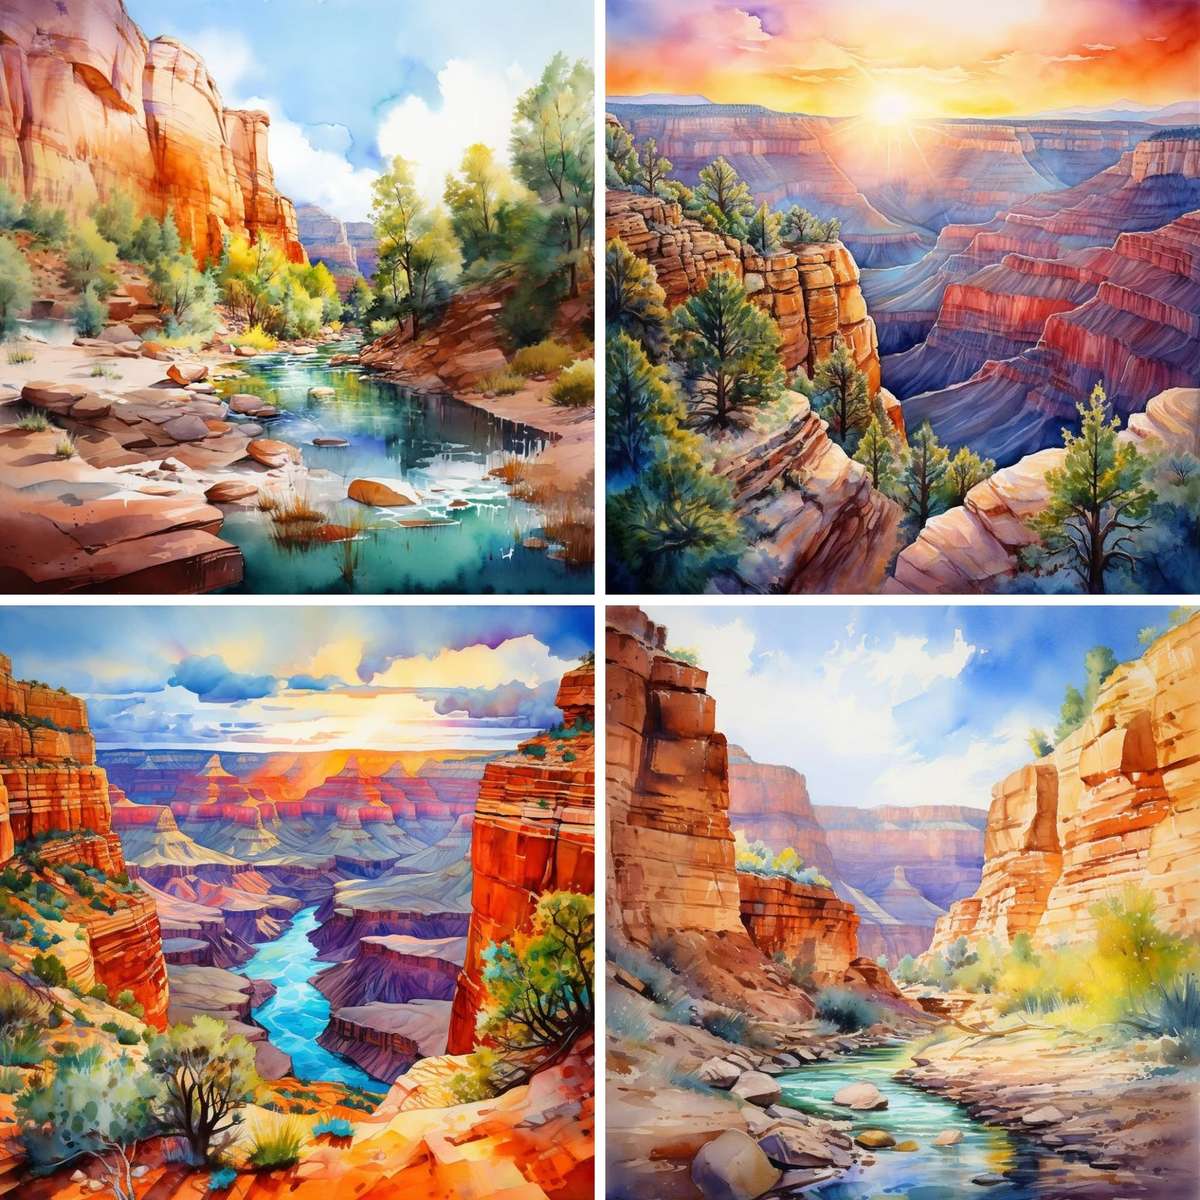 Stunning Nature Great Canyon online puzzle